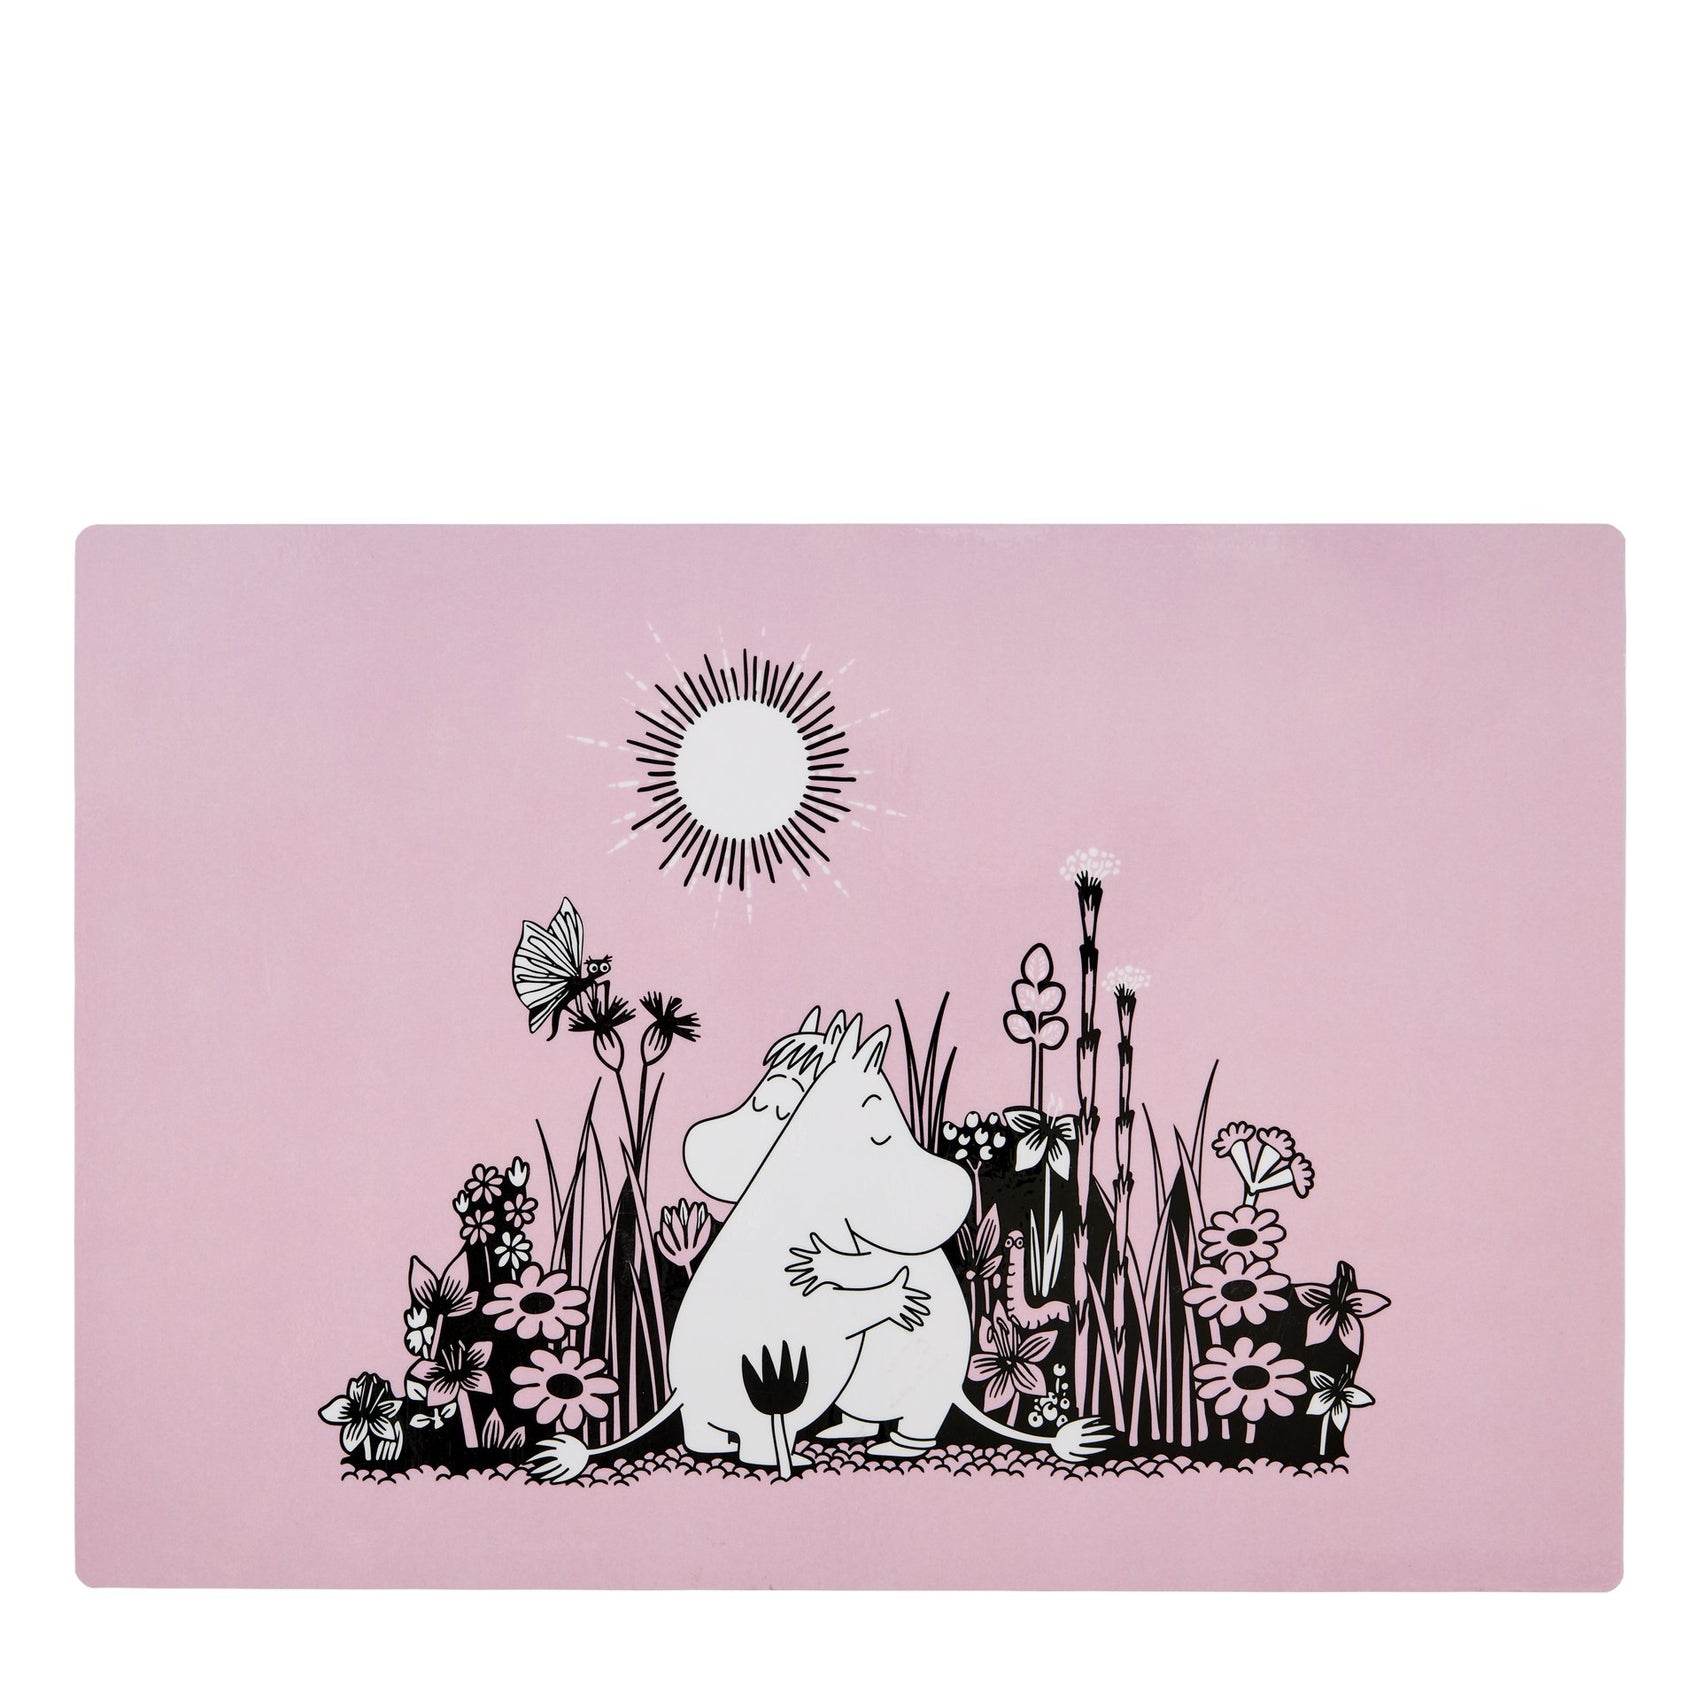 The Moomins placemat HUG 40x30cm